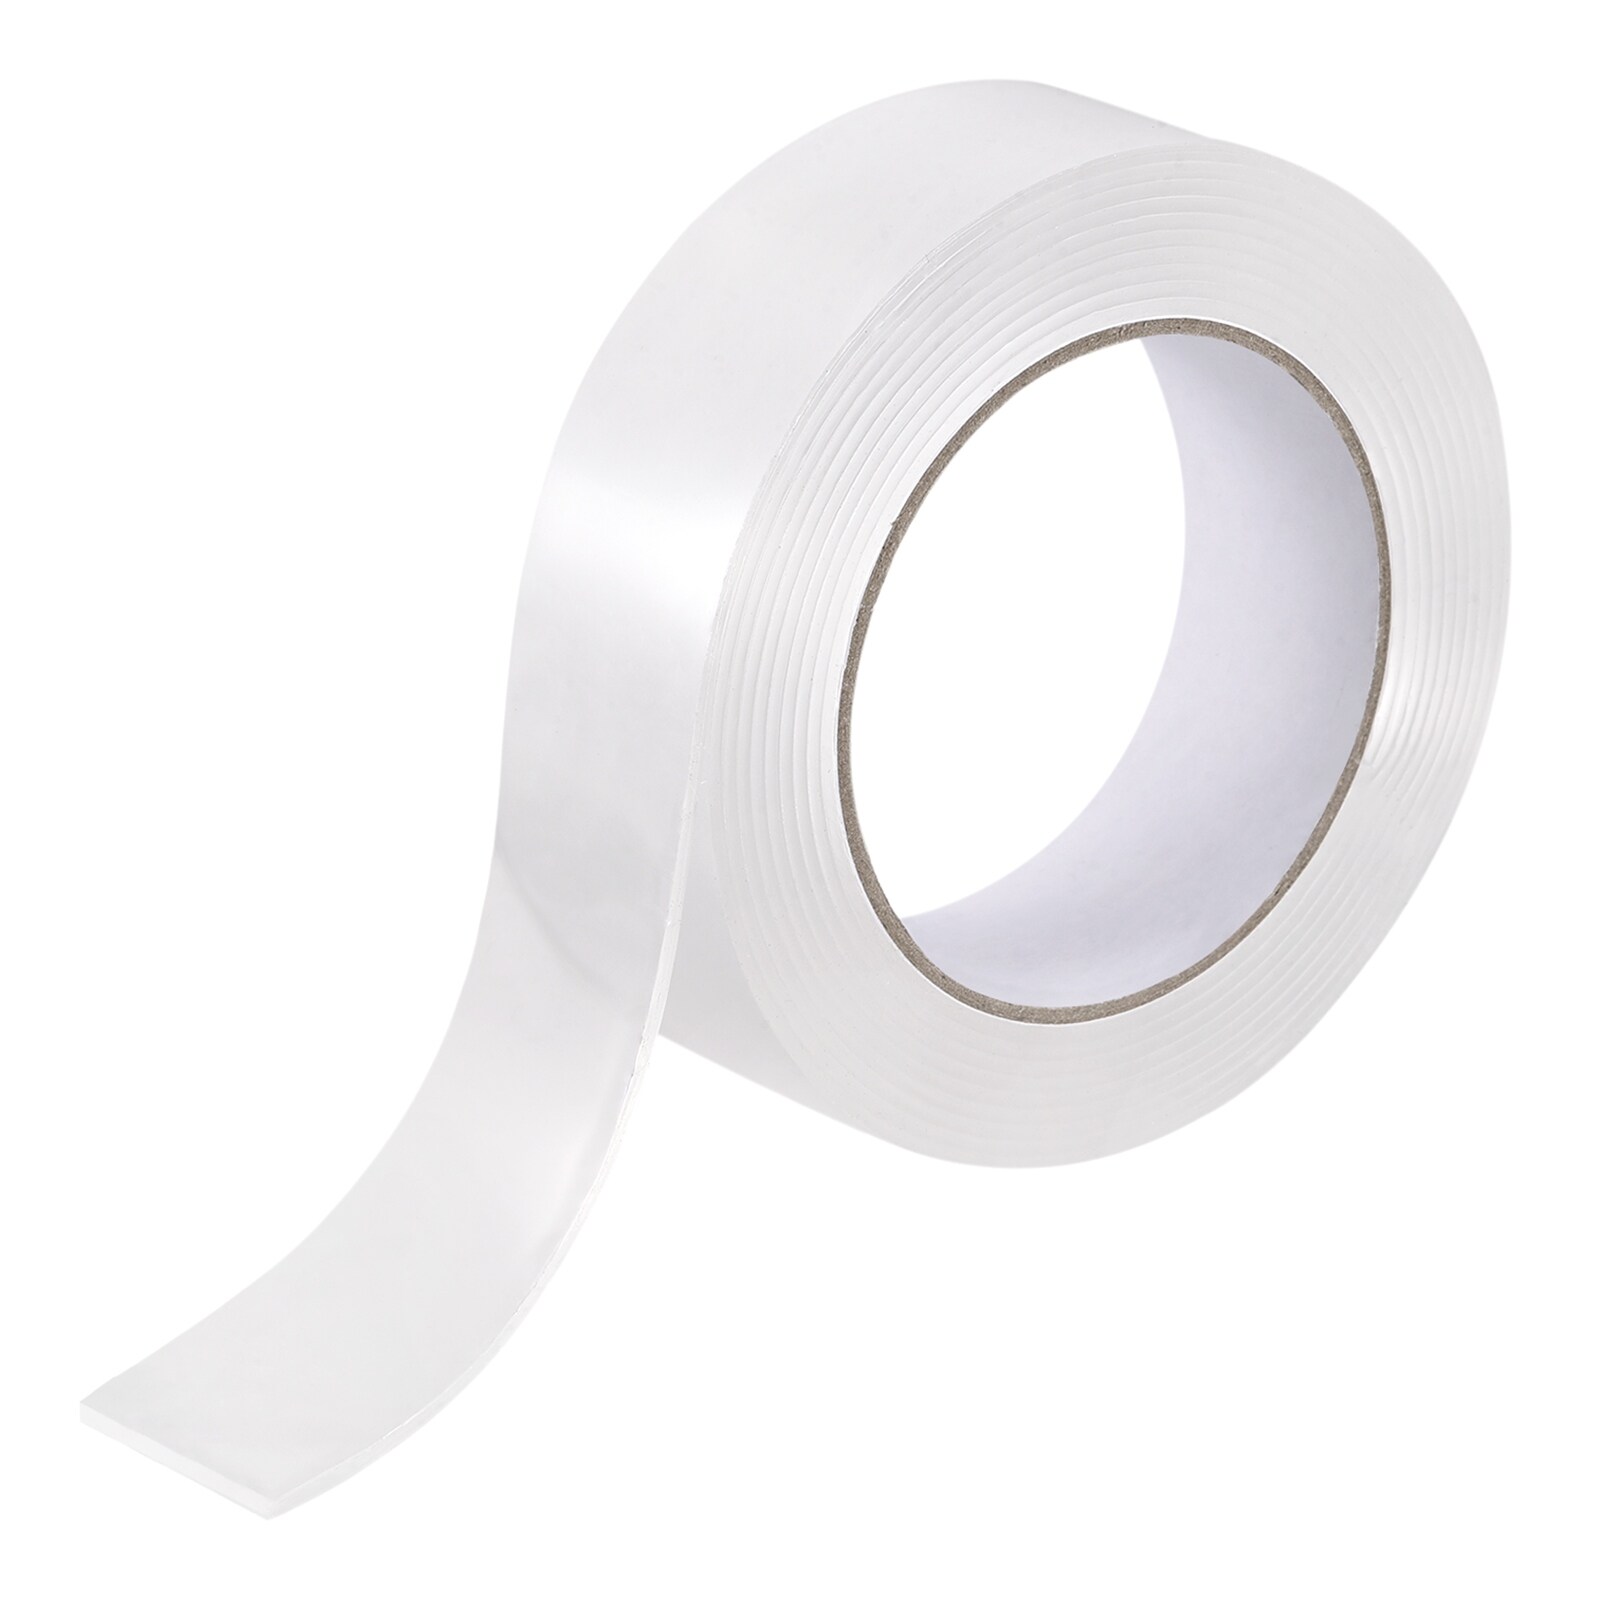 Double Sided Tape-3000x30x2mm Strong Adhesive Mounting Tape for Wall, 2pcs Tape - Transparent - 3000mm x 30mm x 2mm